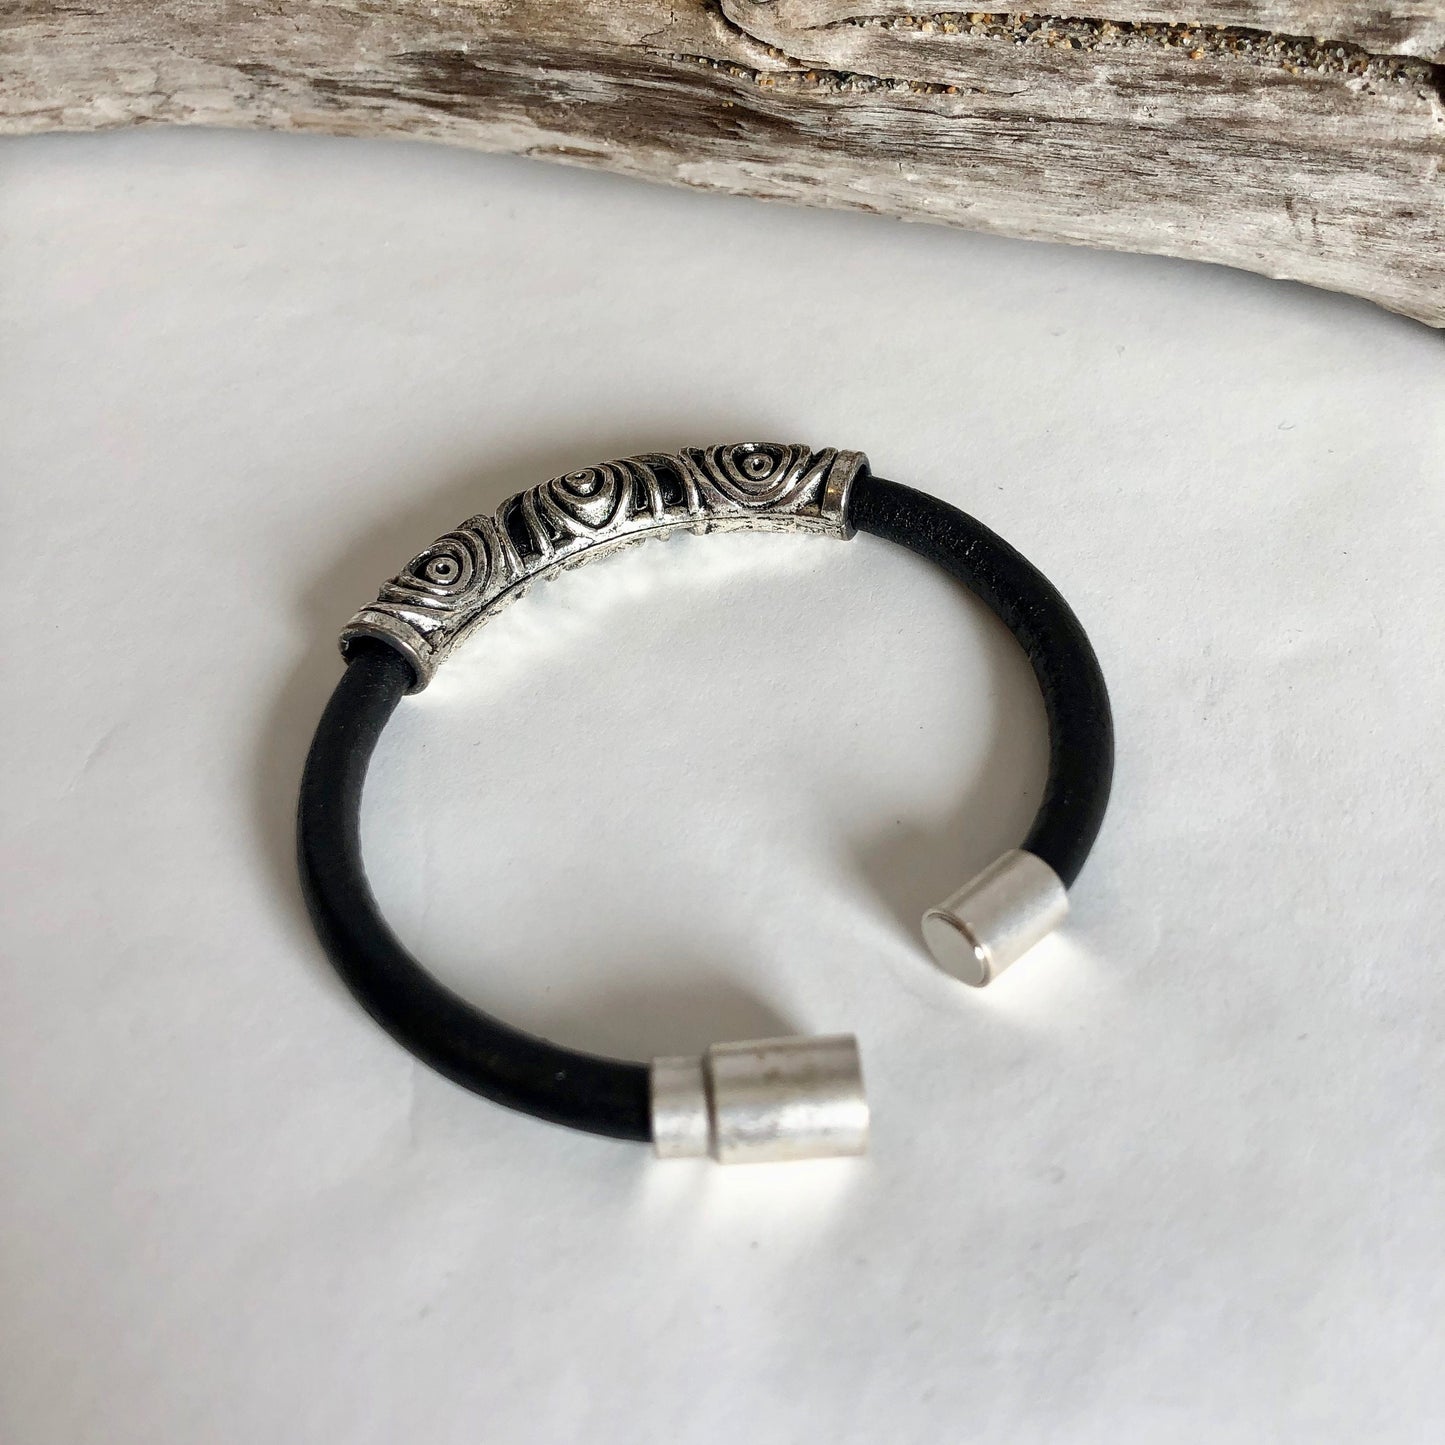 Leather bracelet, made of fine soft black Italian leather, accented with a gorgeous silver swirl slider, and a fine magnetic clasp.